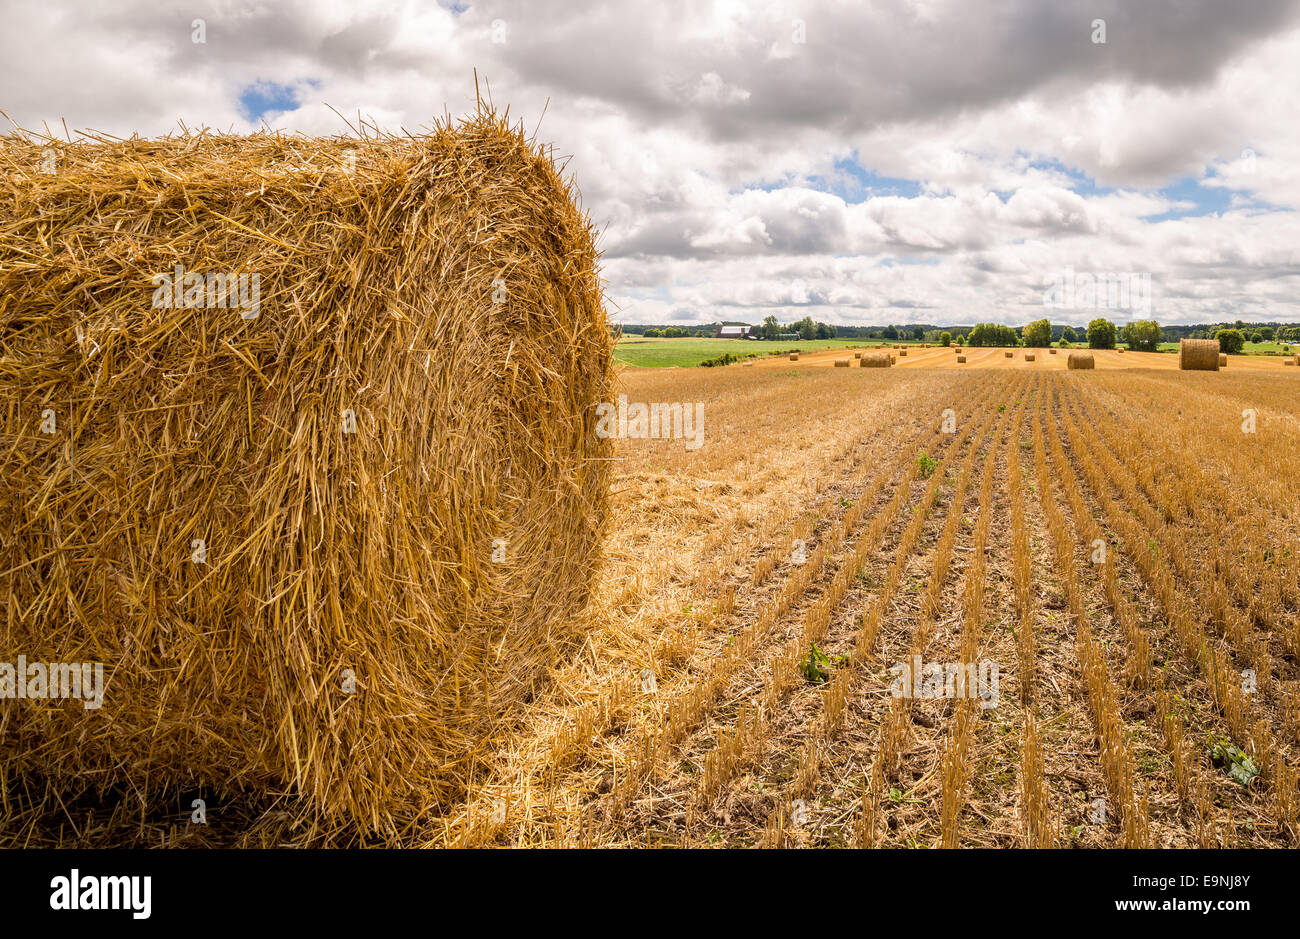 A close up of a round bale of hay in a farm field. Stock Photo